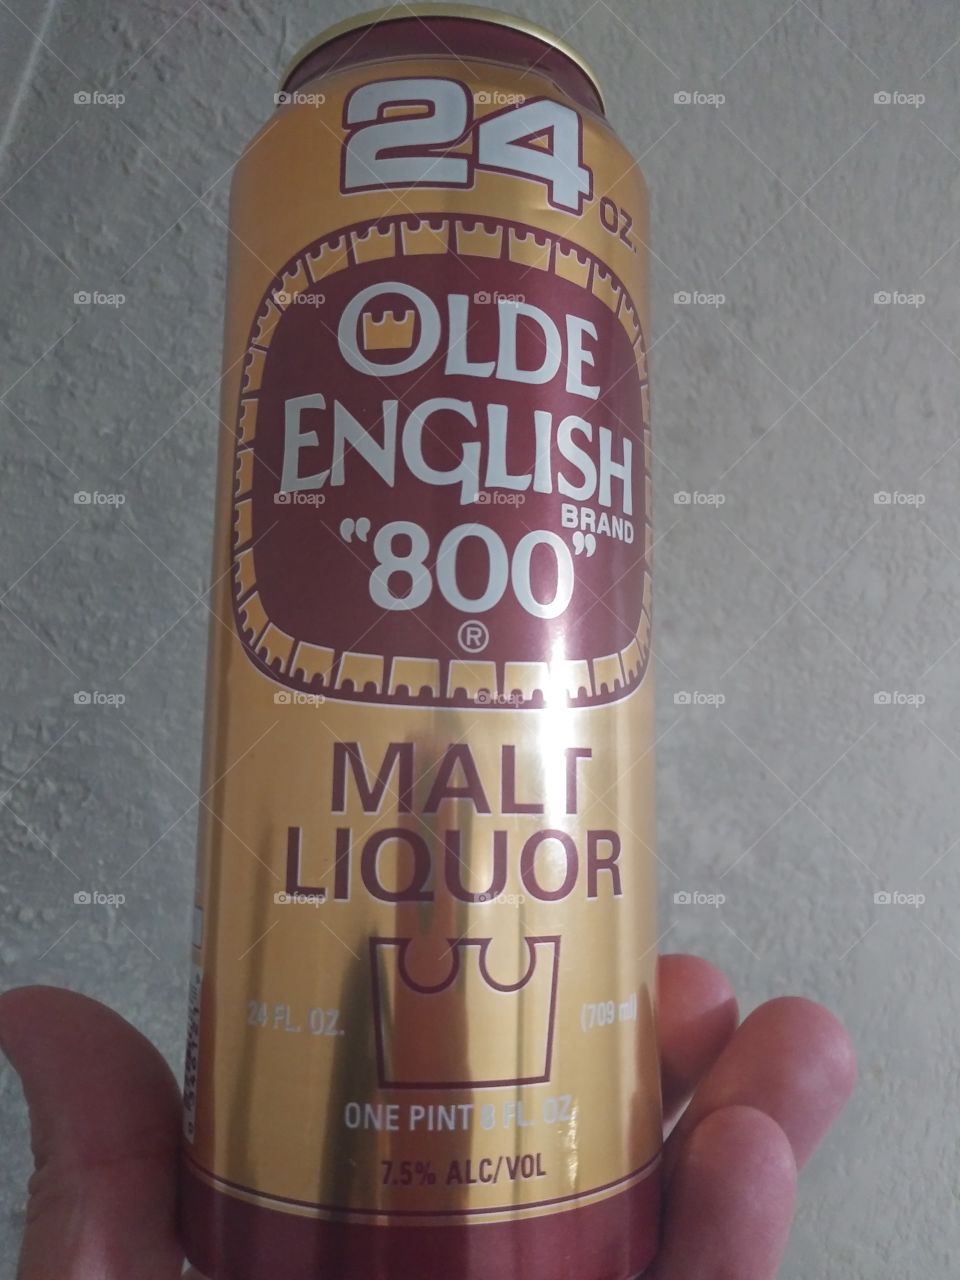 old english is pretty good.My choice.Cheap beer.I like it.I drink a little but not extreme.It fits my taste buds.Other people don't like it but i do honestly.Makes me feel ok.I like the gold,red and white colors.800.Malt liquor.